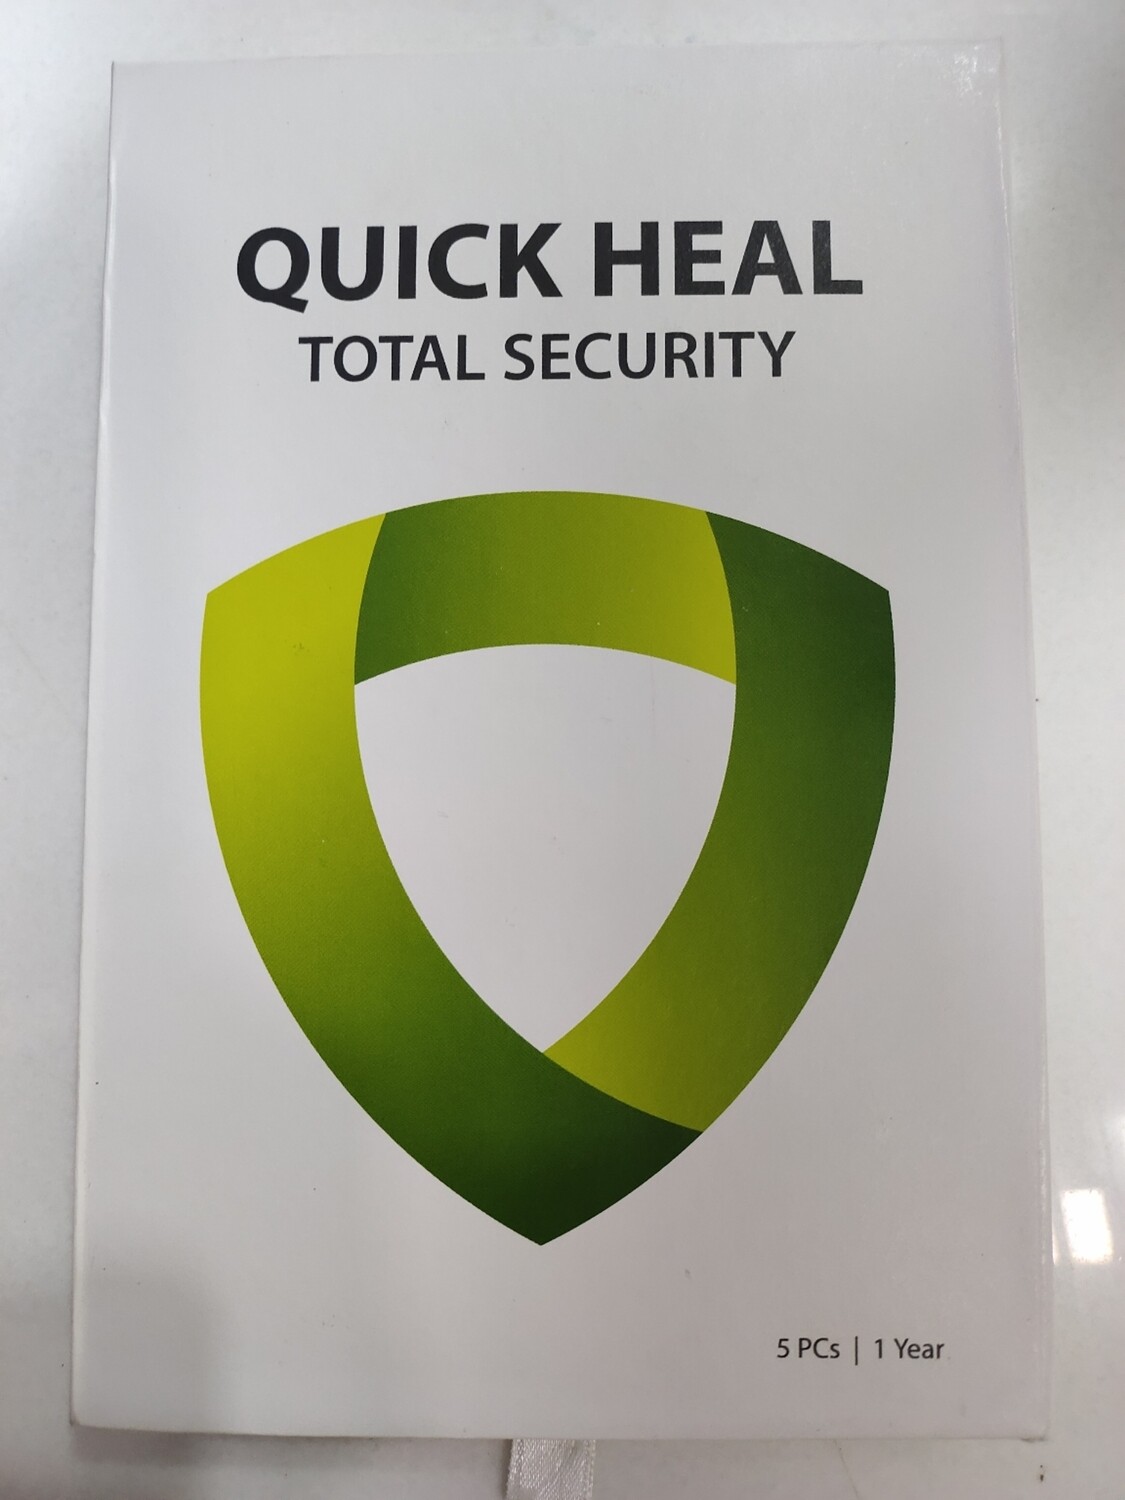 New, 5 User, 1 Year, Quick Heal Total Security